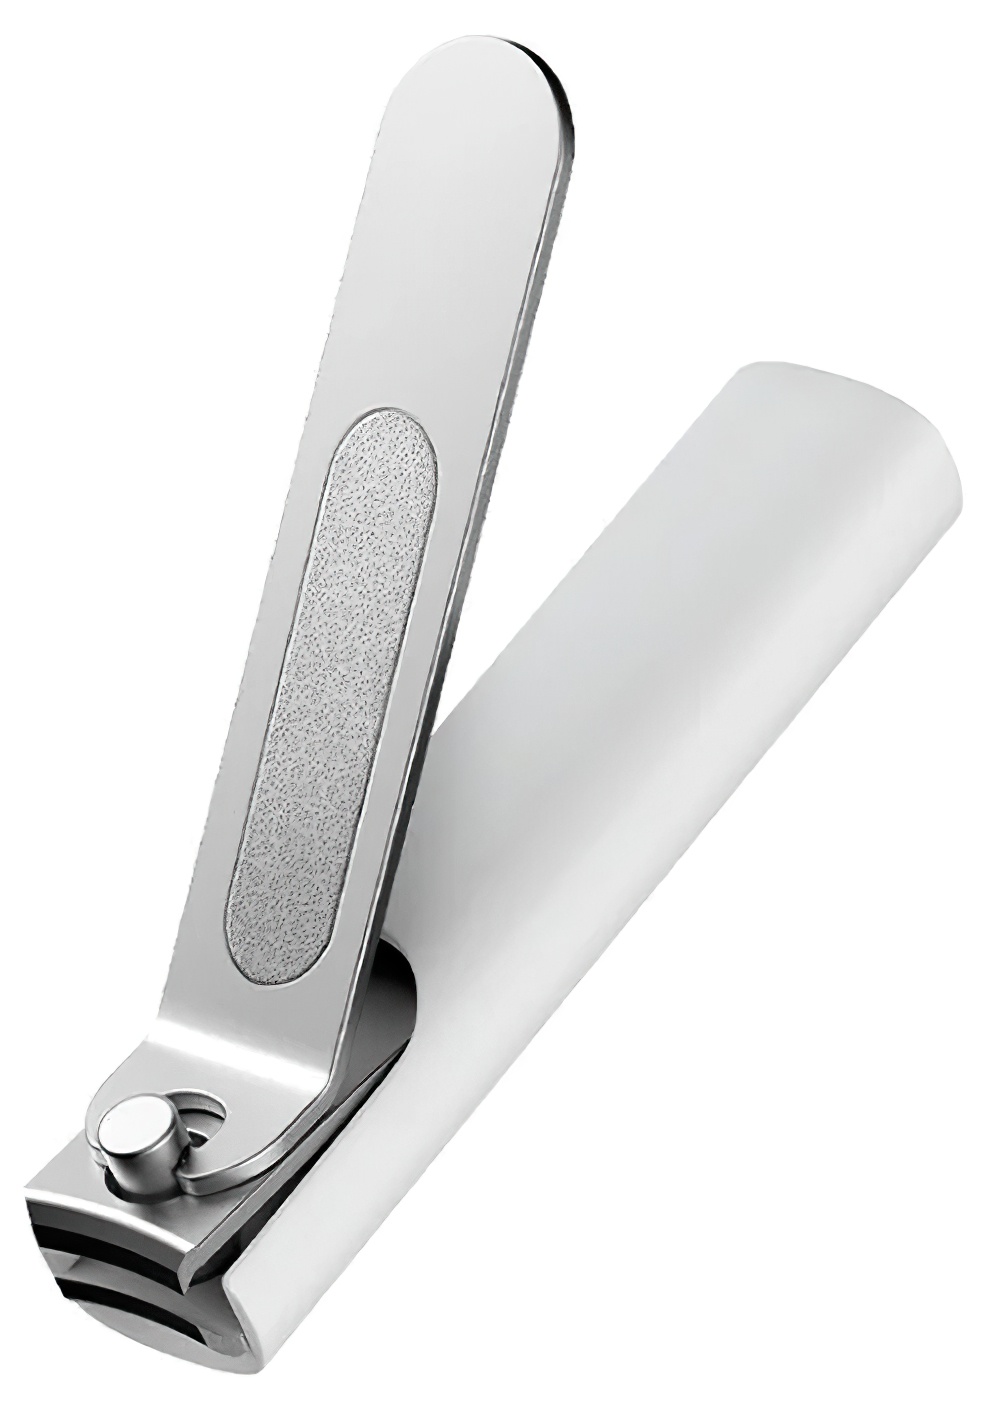 Xiaomi Mijia Stainless Steel Nail Clippers (MJZJD001QW) xiaomi mijia stainless steel nail clippers mjzjd001qw